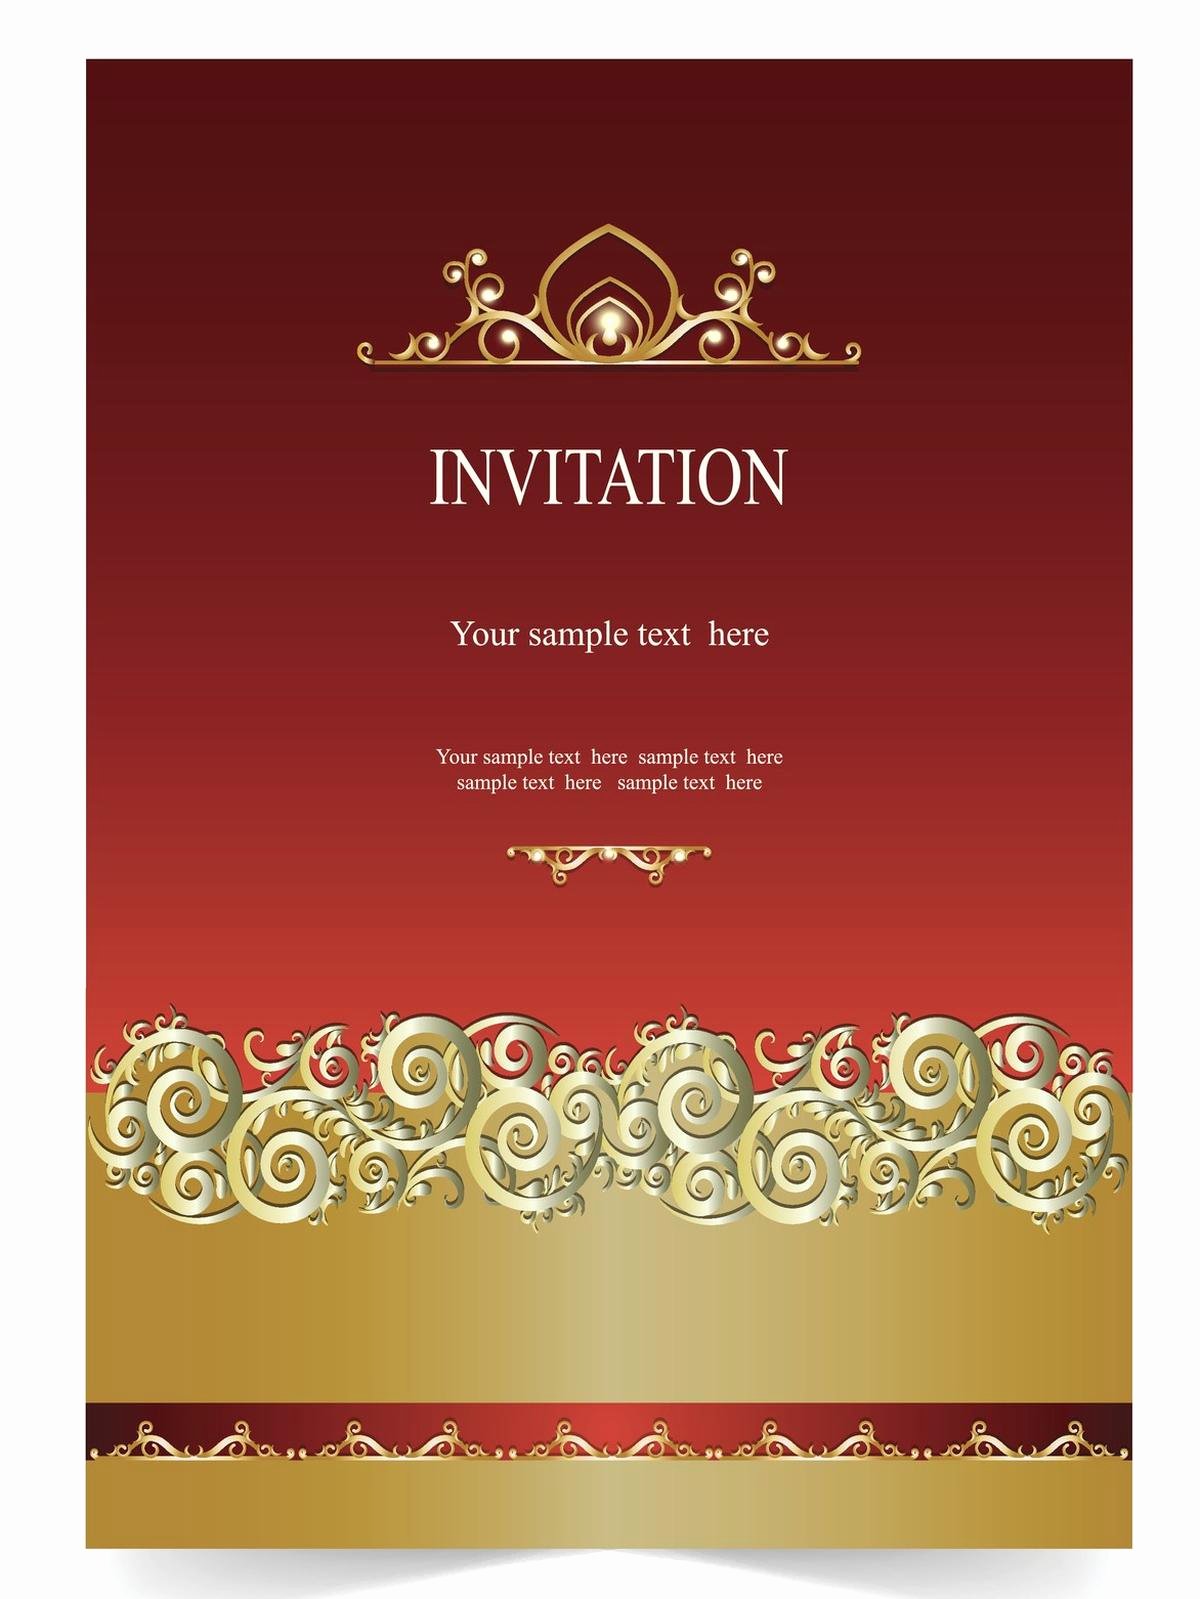 Farewell Party Invitations Templates Best Of Invitation Templates that are Perfect for Your Farewell Party